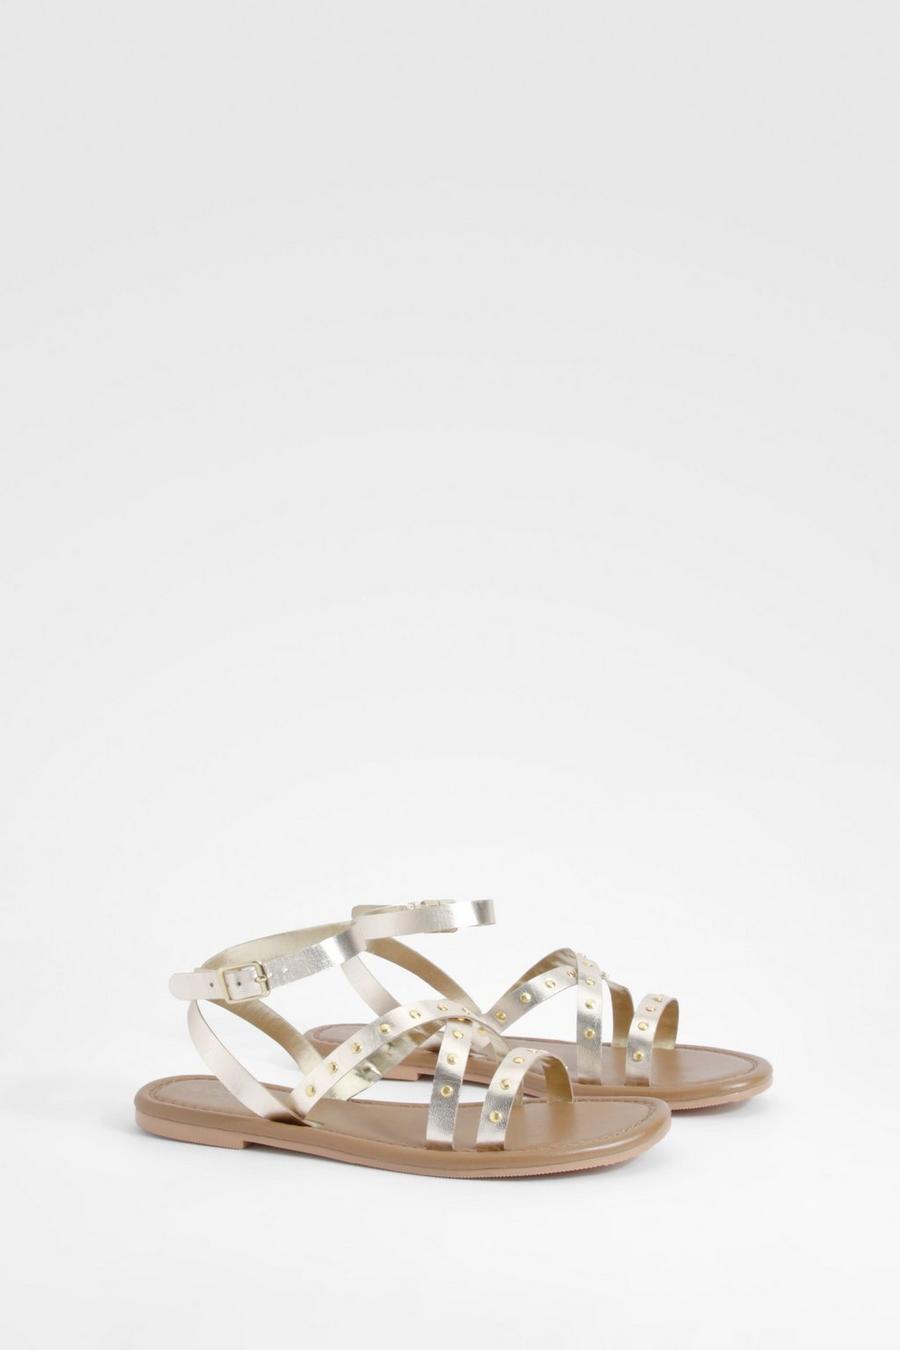 Gold Wide Width Leather Studded 2 Part Sandals image number 1